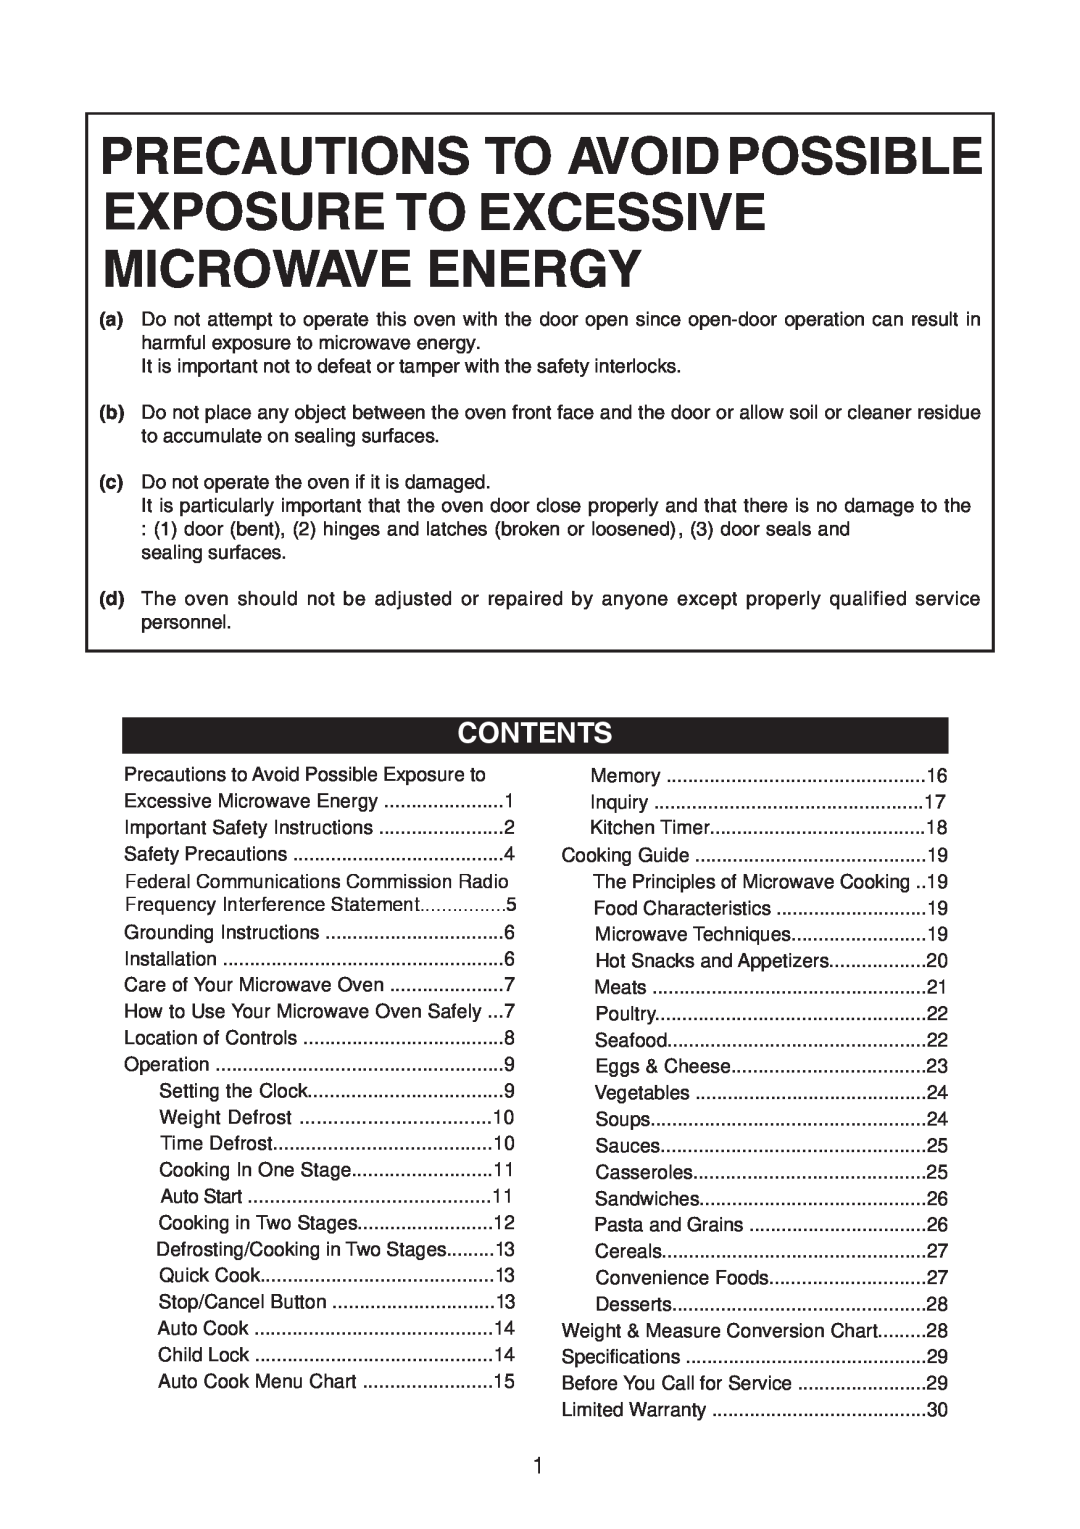 Emerson MV1094F, MW8889SB, 900W owner manual Contents, Precautions To Avoid Possible Exposure To Excessive Microwave Energy 